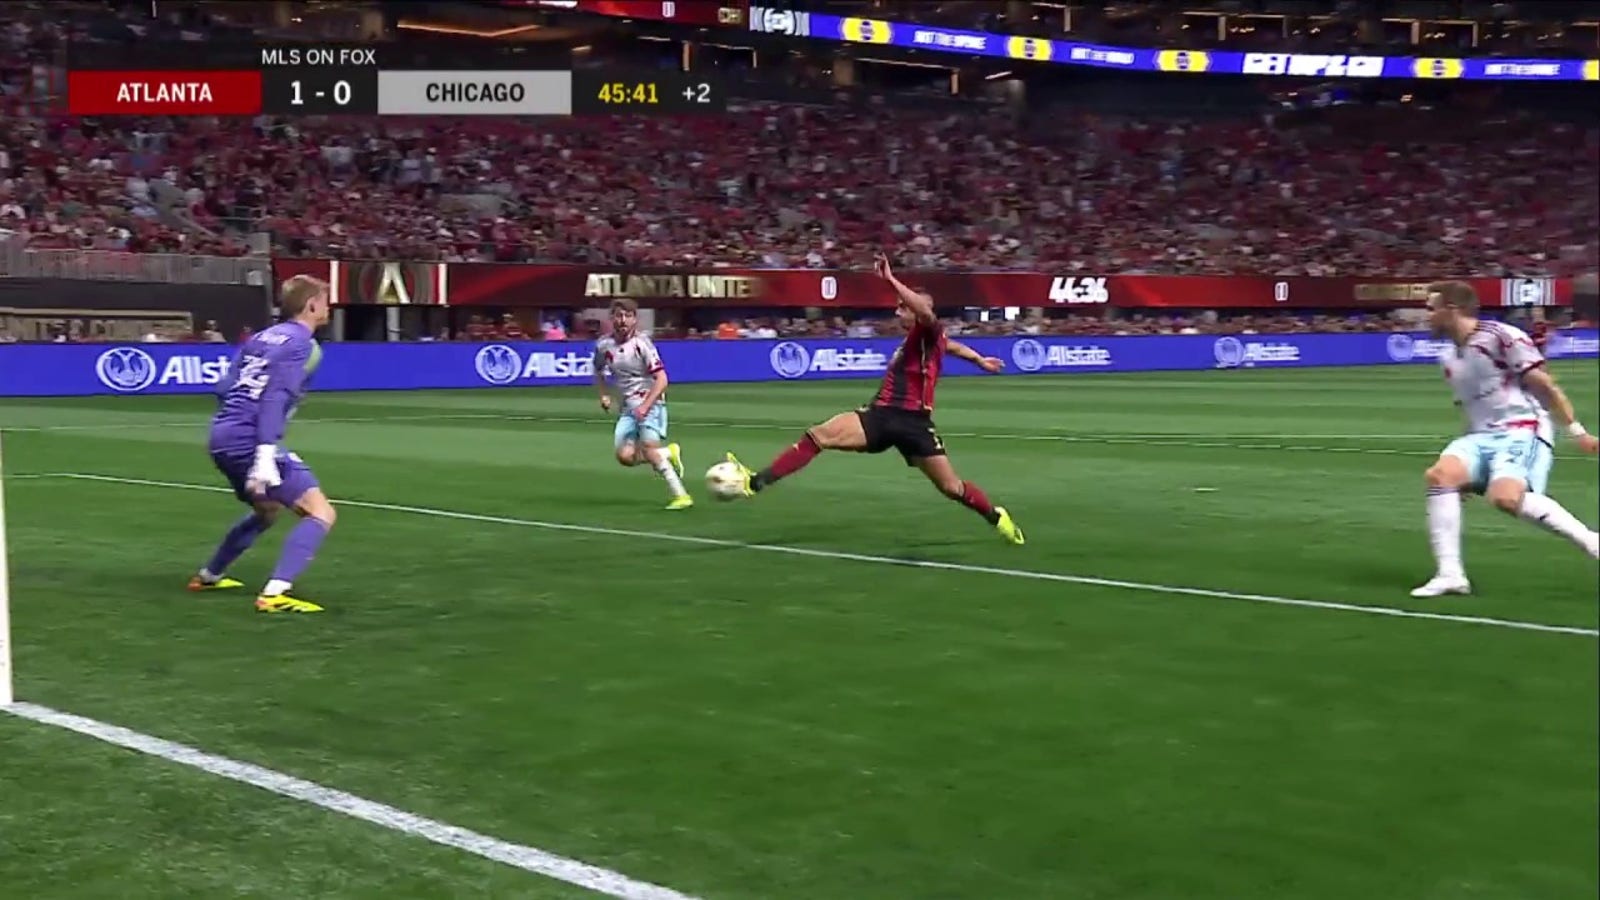 Giorgos Giakoumakis finds the back of the net for Atlanta United FC vs. Chicago Fire FC